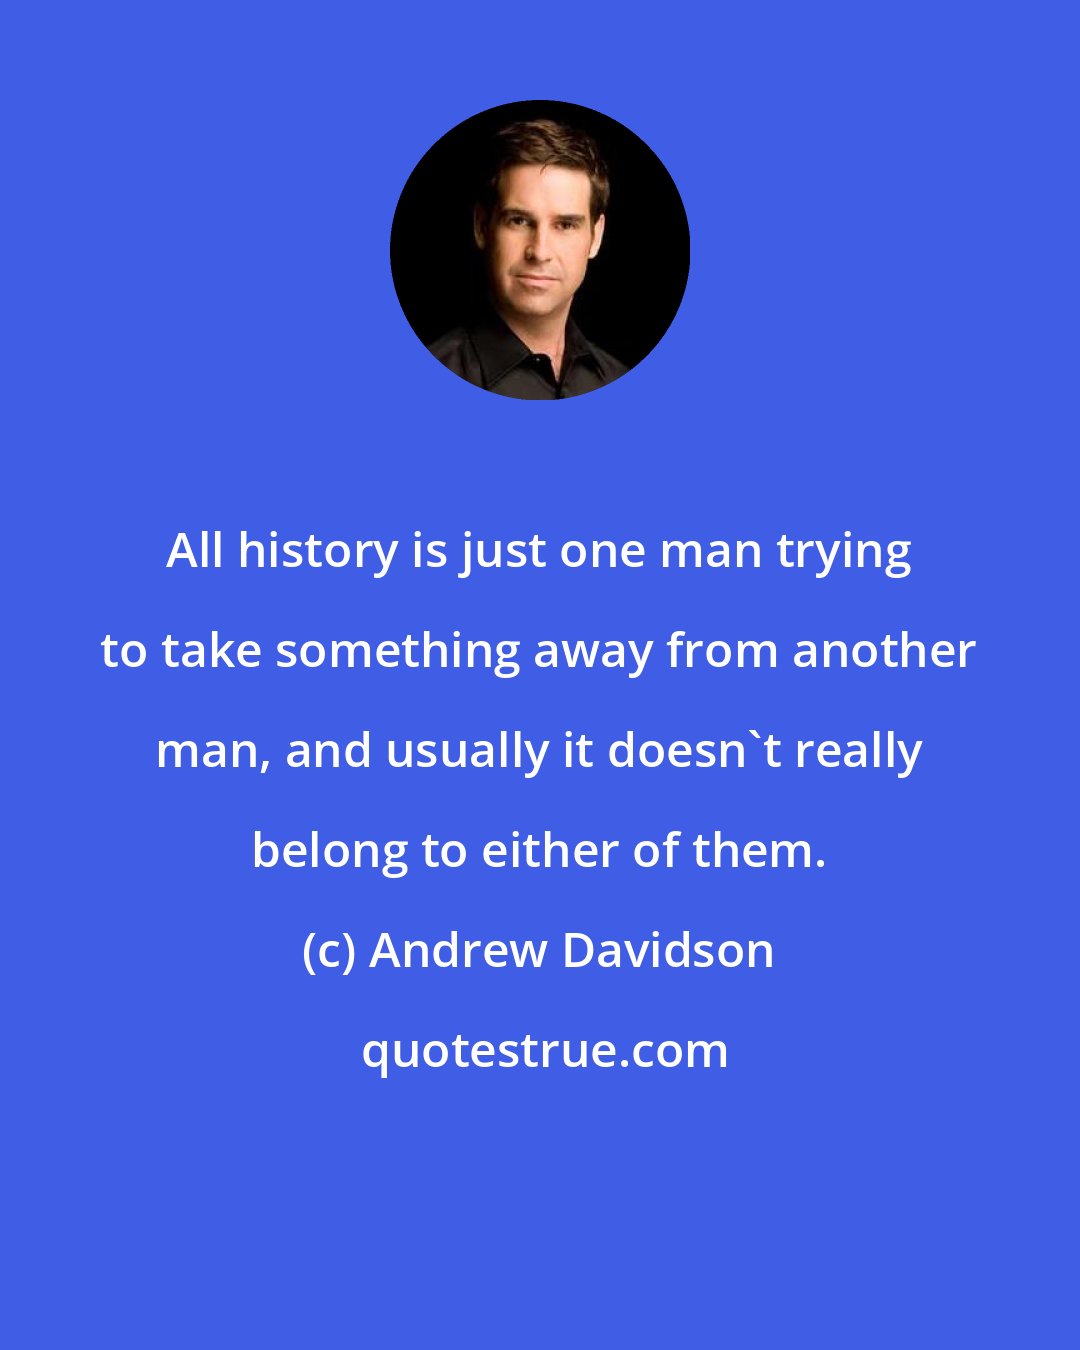 Andrew Davidson: All history is just one man trying to take something away from another man, and usually it doesn't really belong to either of them.